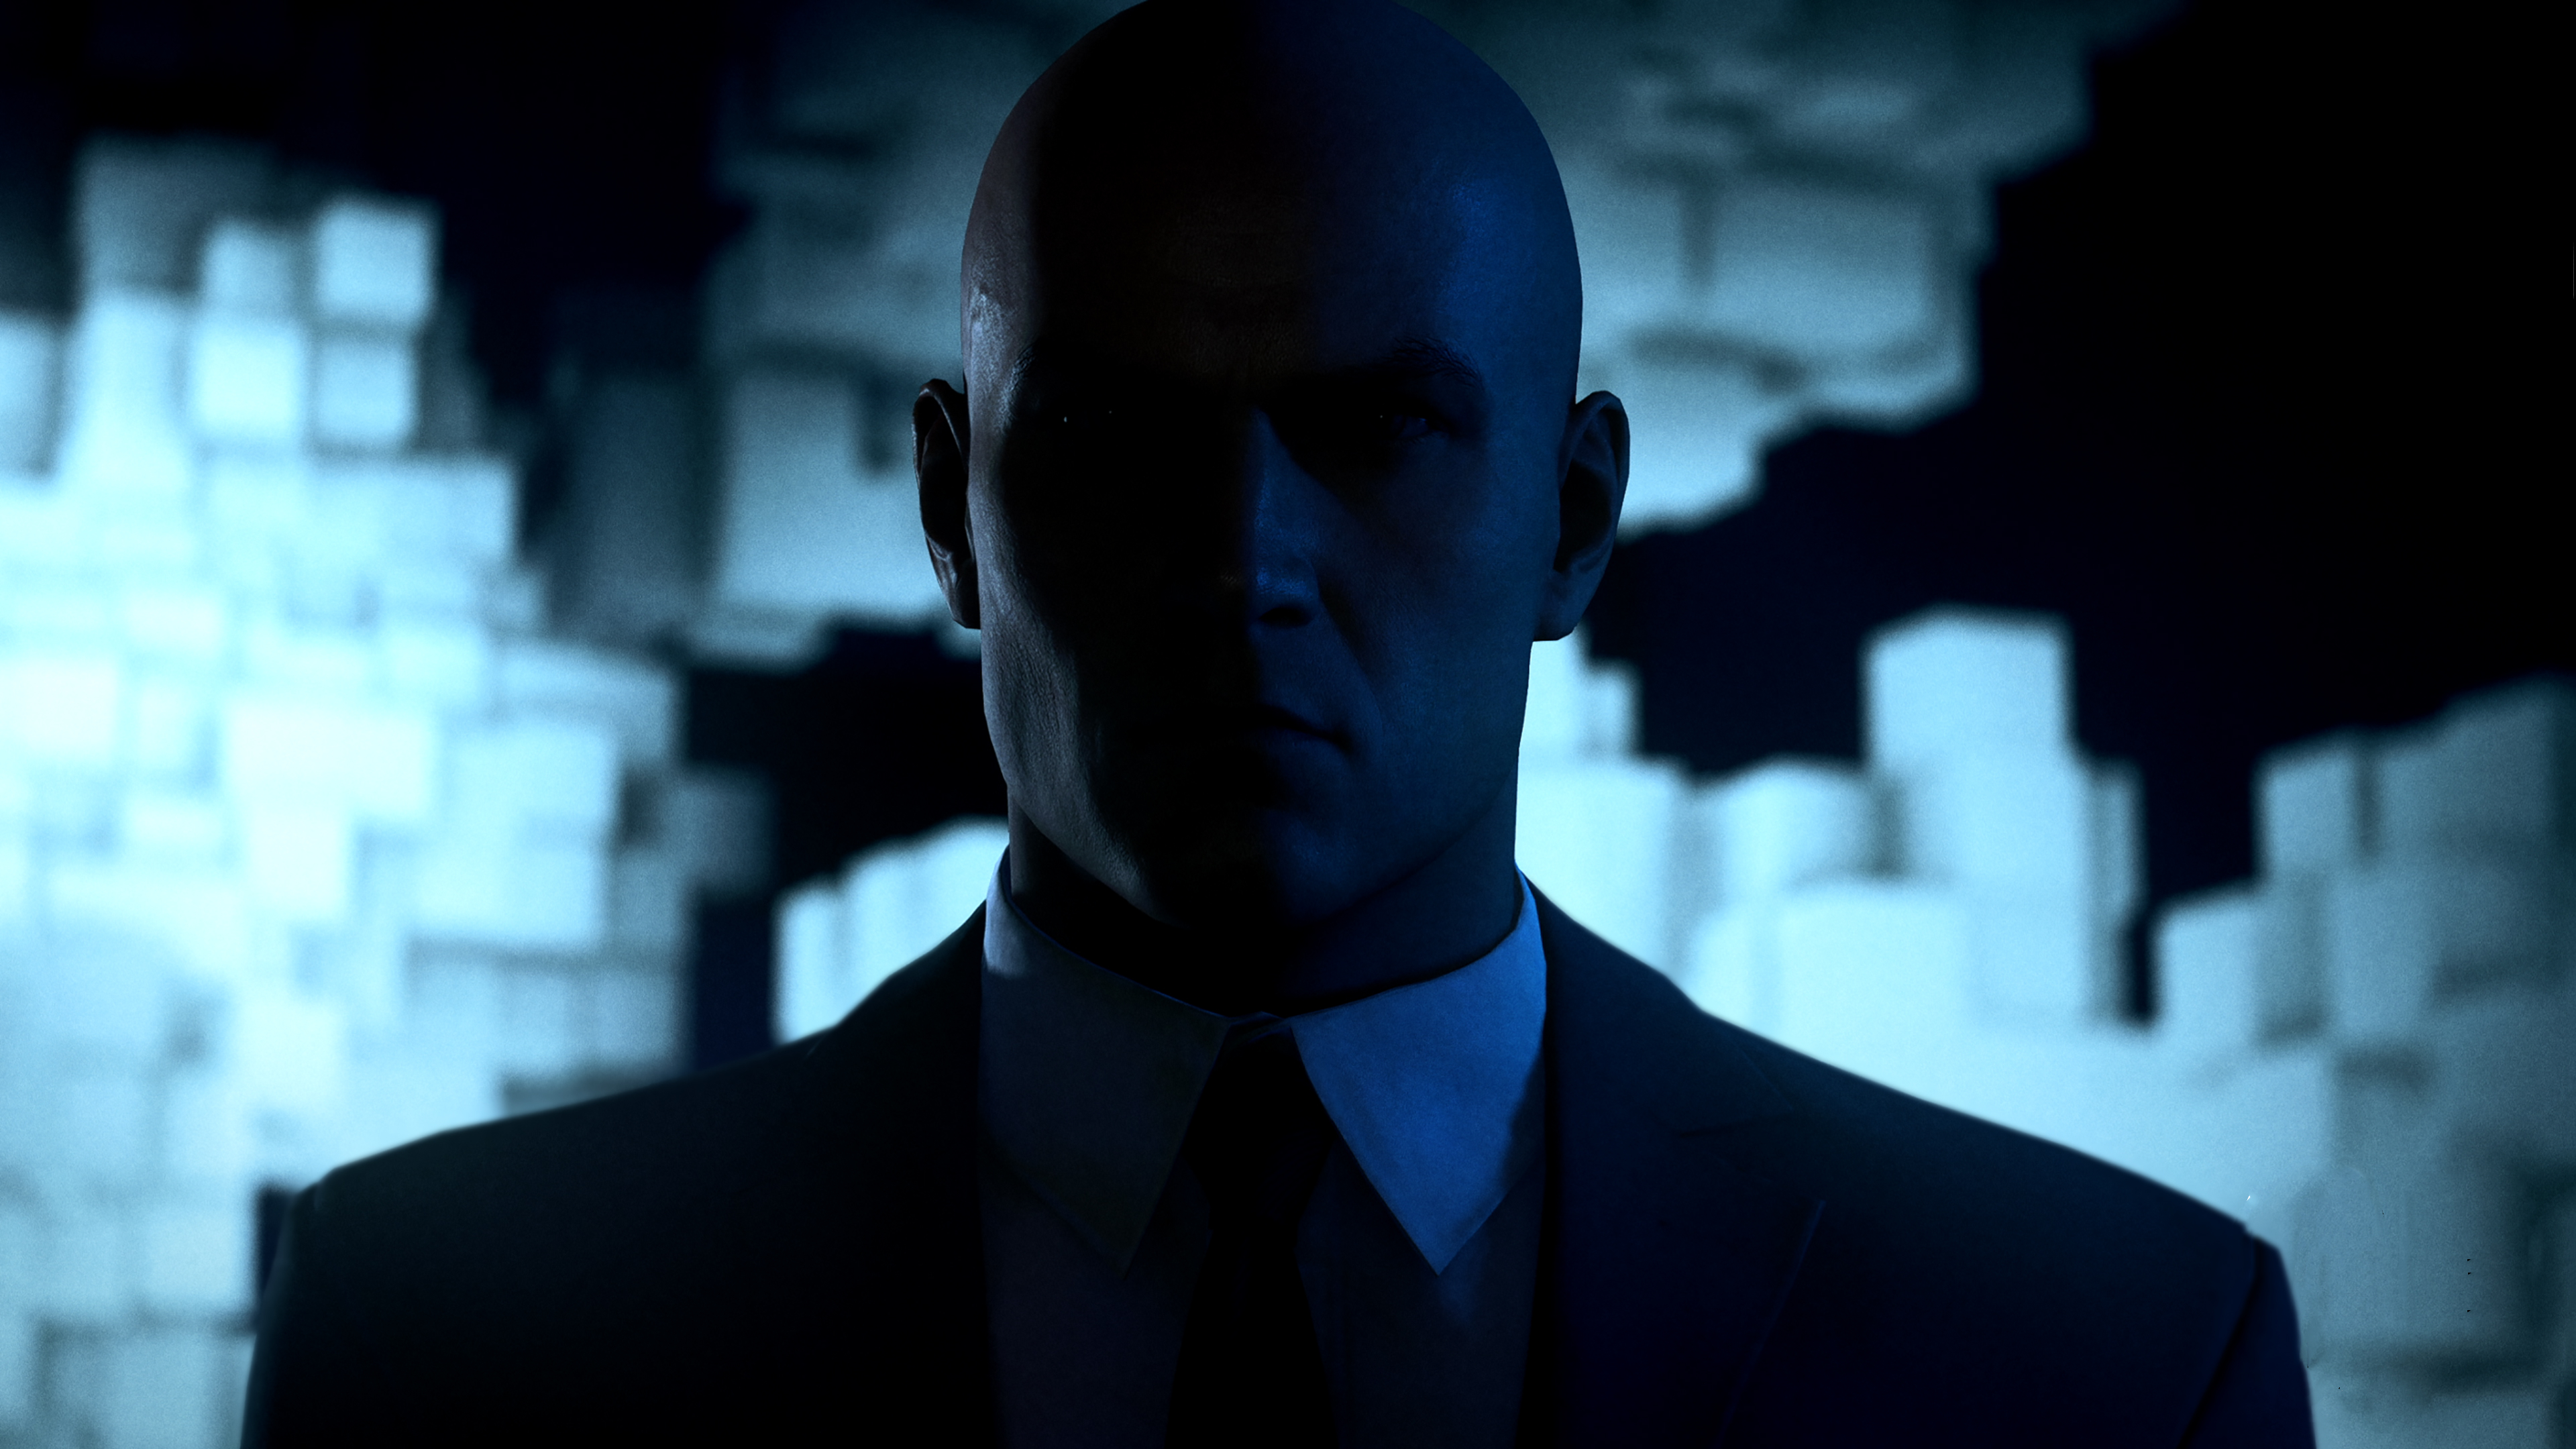 Hitman Absolution Hitman Codename 47 Agent 47 Video game Hitman game  computer Wallpaper video Game png  PNGWing